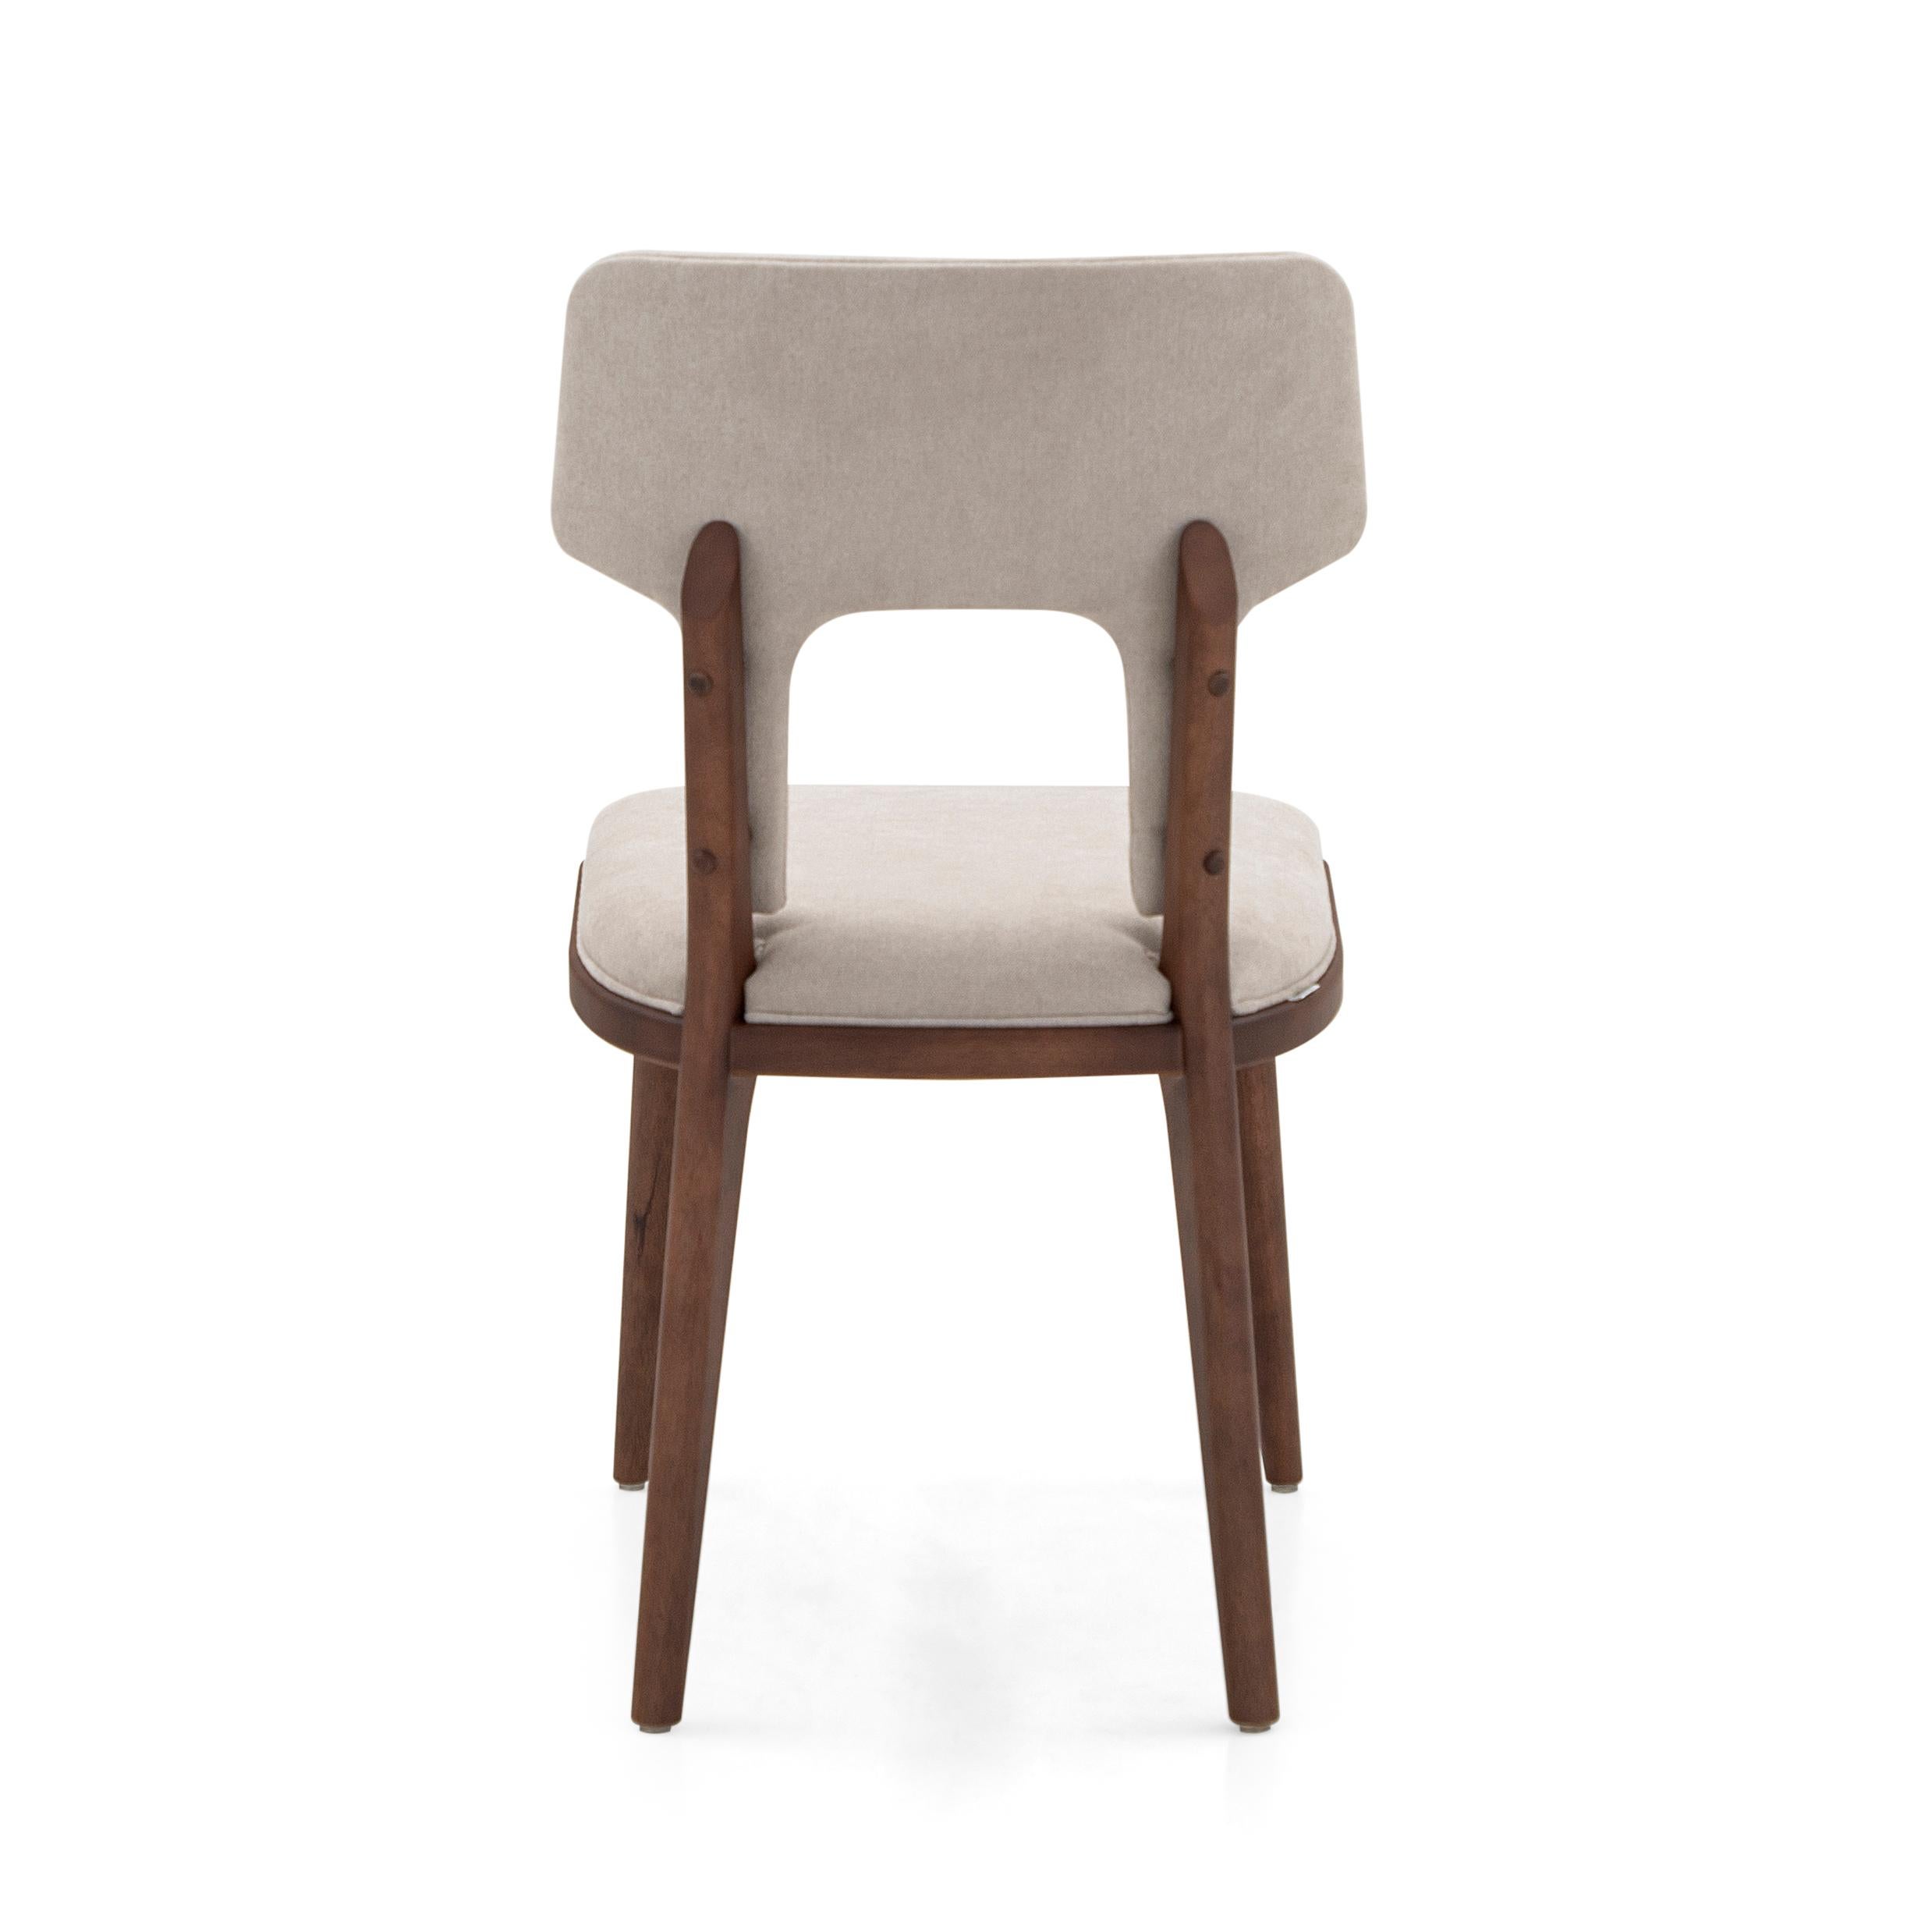 Fork Dining Chair in Light Beige Fabric and Walnut Wood Finish, Set of 2 In New Condition For Sale In Miami, FL